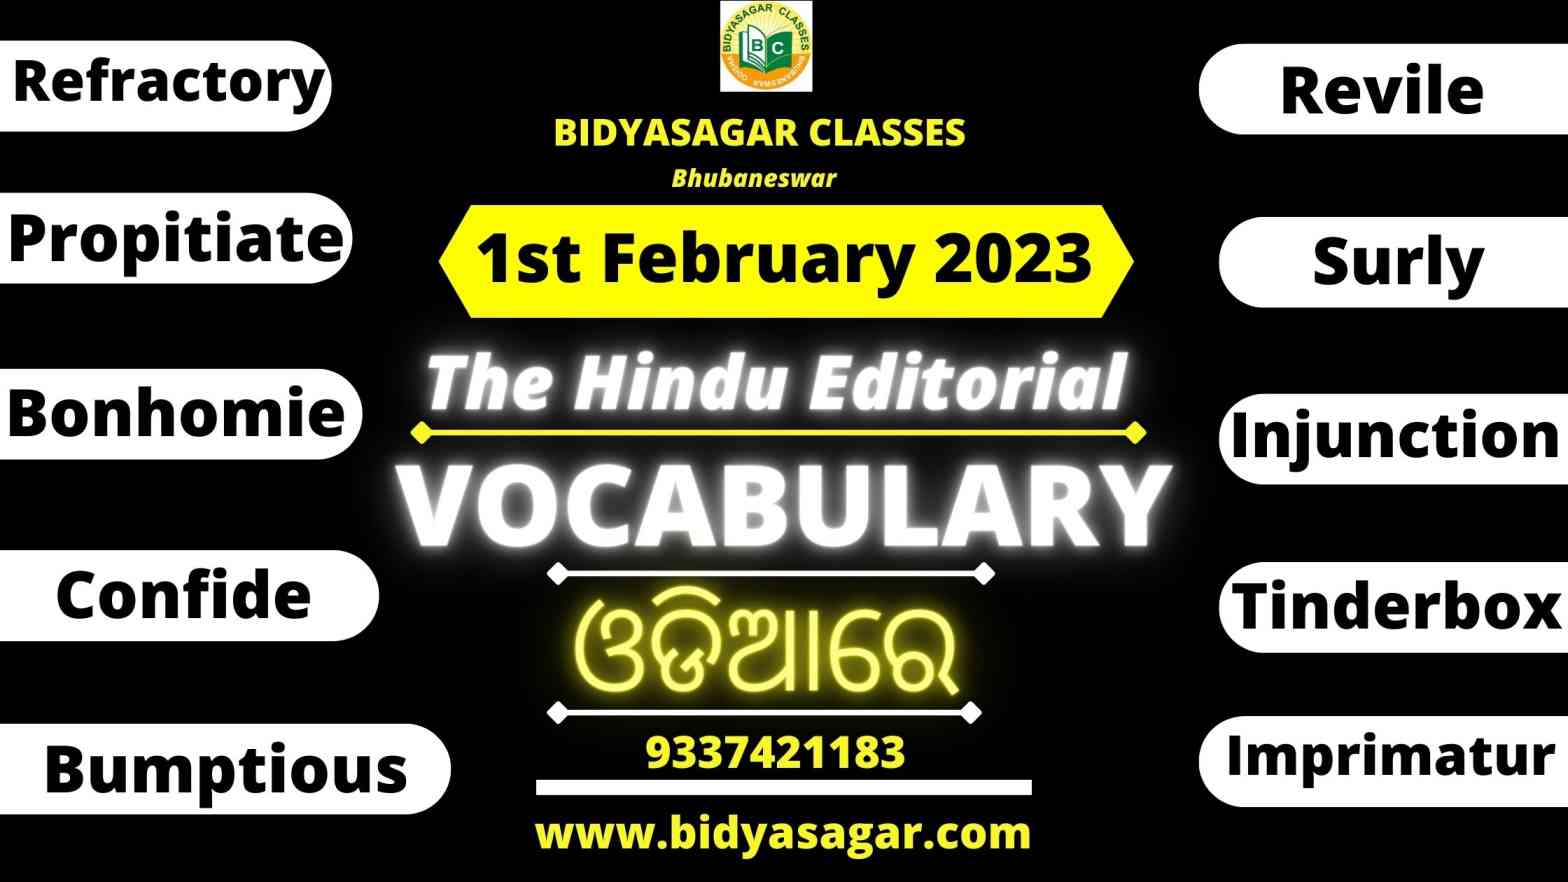 The Hindu Editorial Vocabulary of 1st February 2023